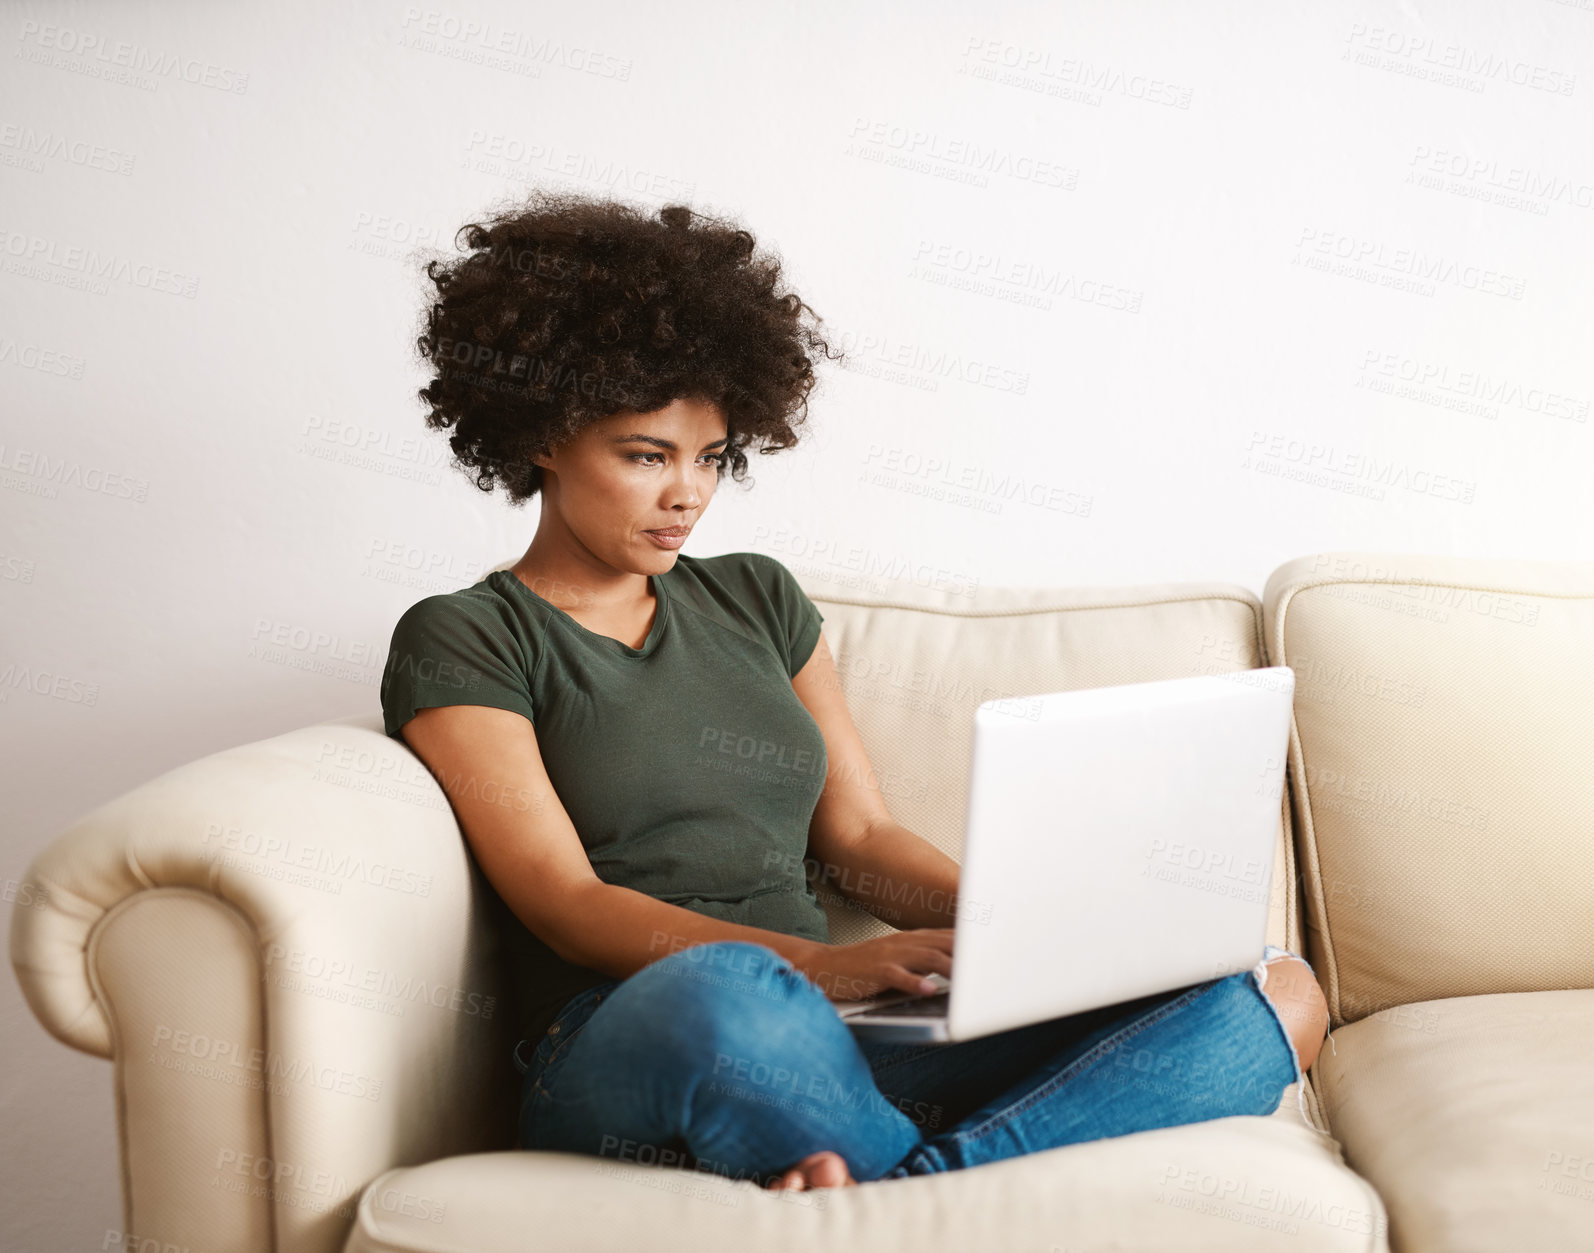 Buy stock photo Cropped shot of a woman using her laptop on the sofa at home with her legs crossed